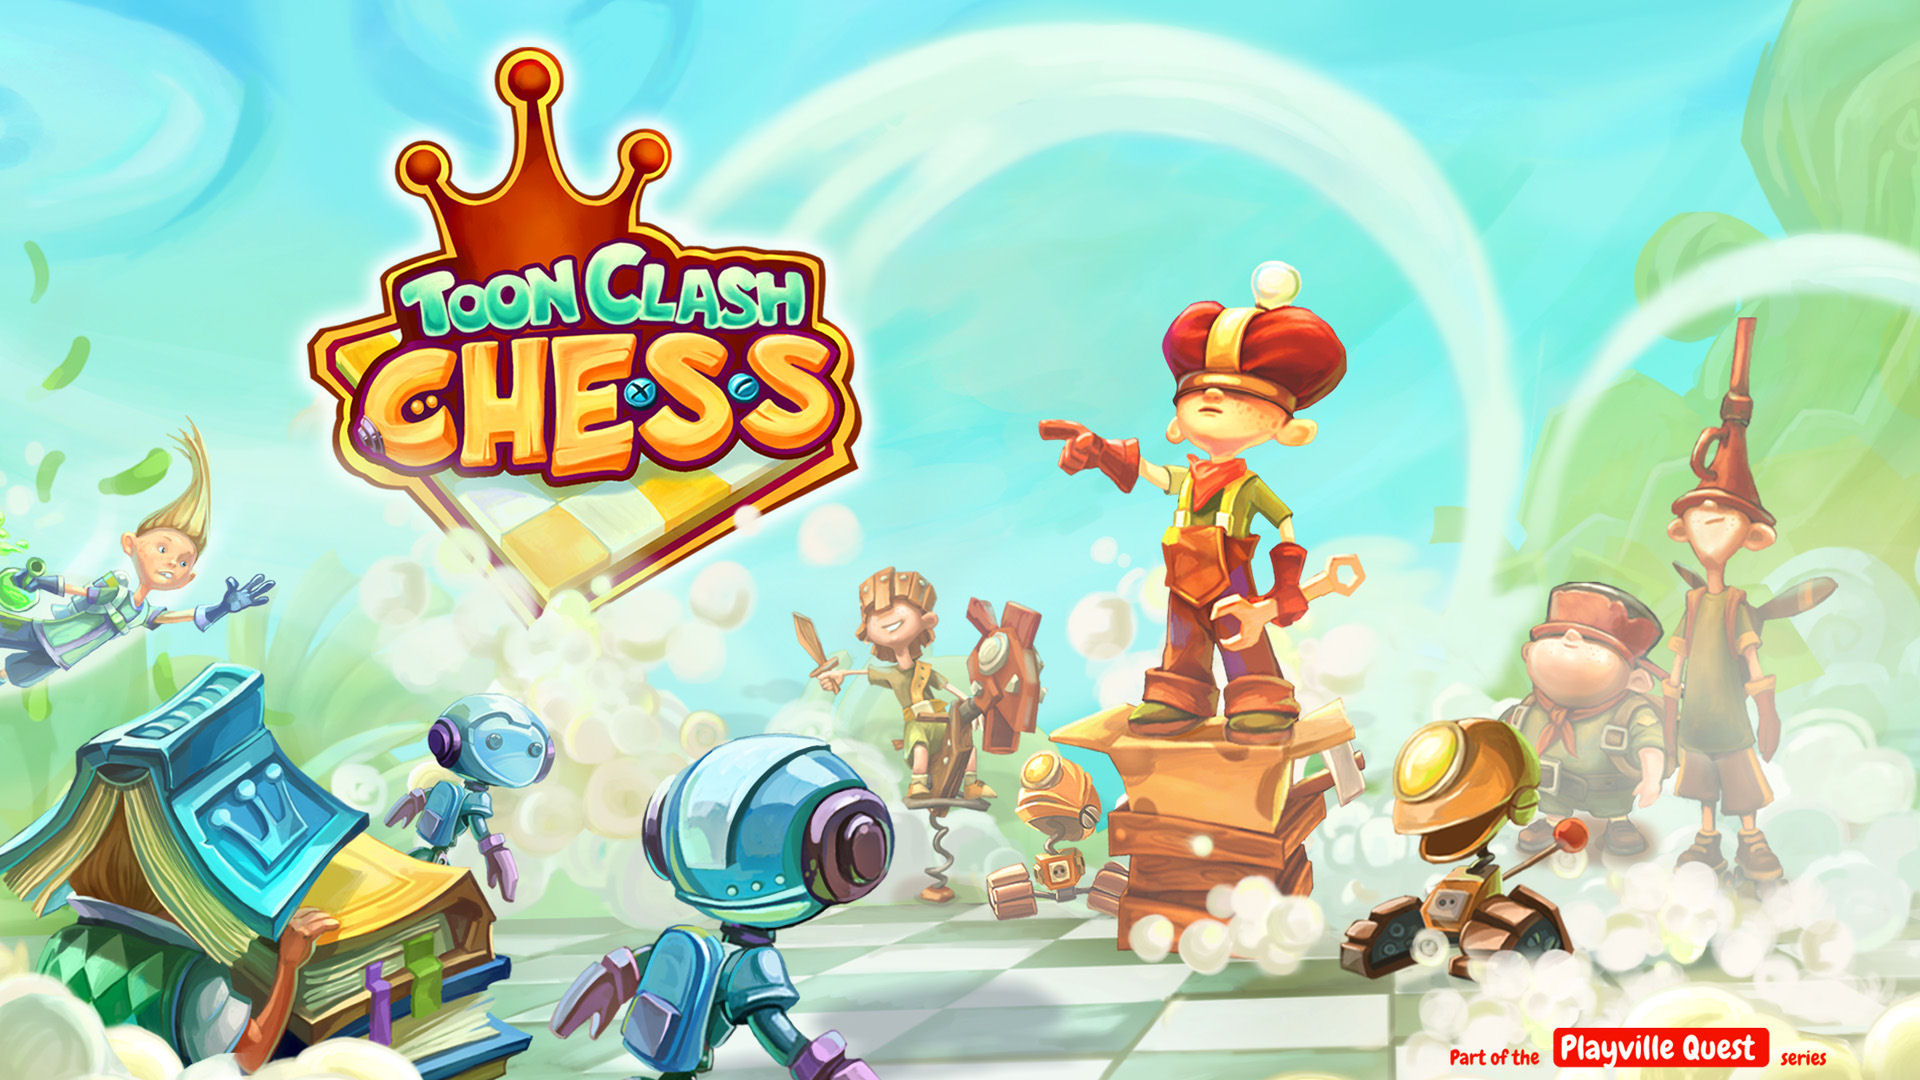 Toon Clash CHESS instaling